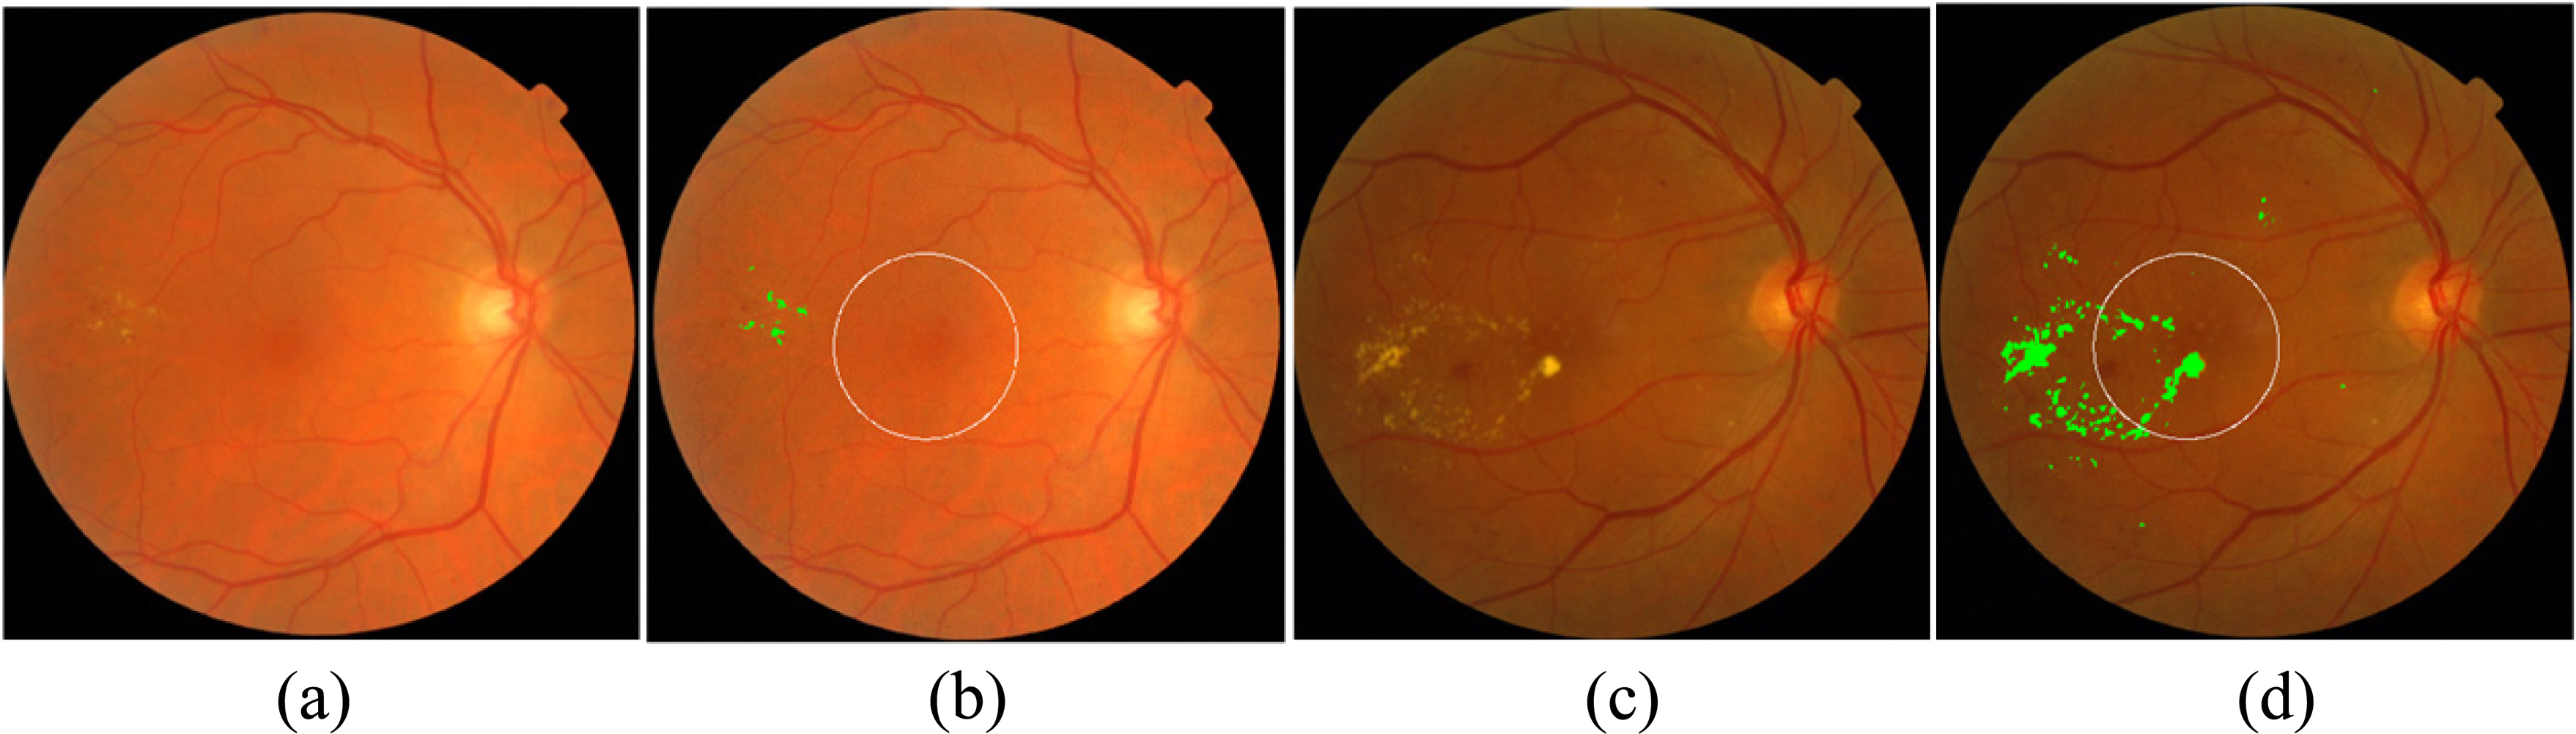 Examples of macular edema detection for MESSIDOR database. (a) and (b): Original and result of exudate detection and macular coordinates images of a non-CSME example, (c) and (d): Original and result of exudate detection and macular coordinates images of a CSME example, the detected exudates are labelled in green.